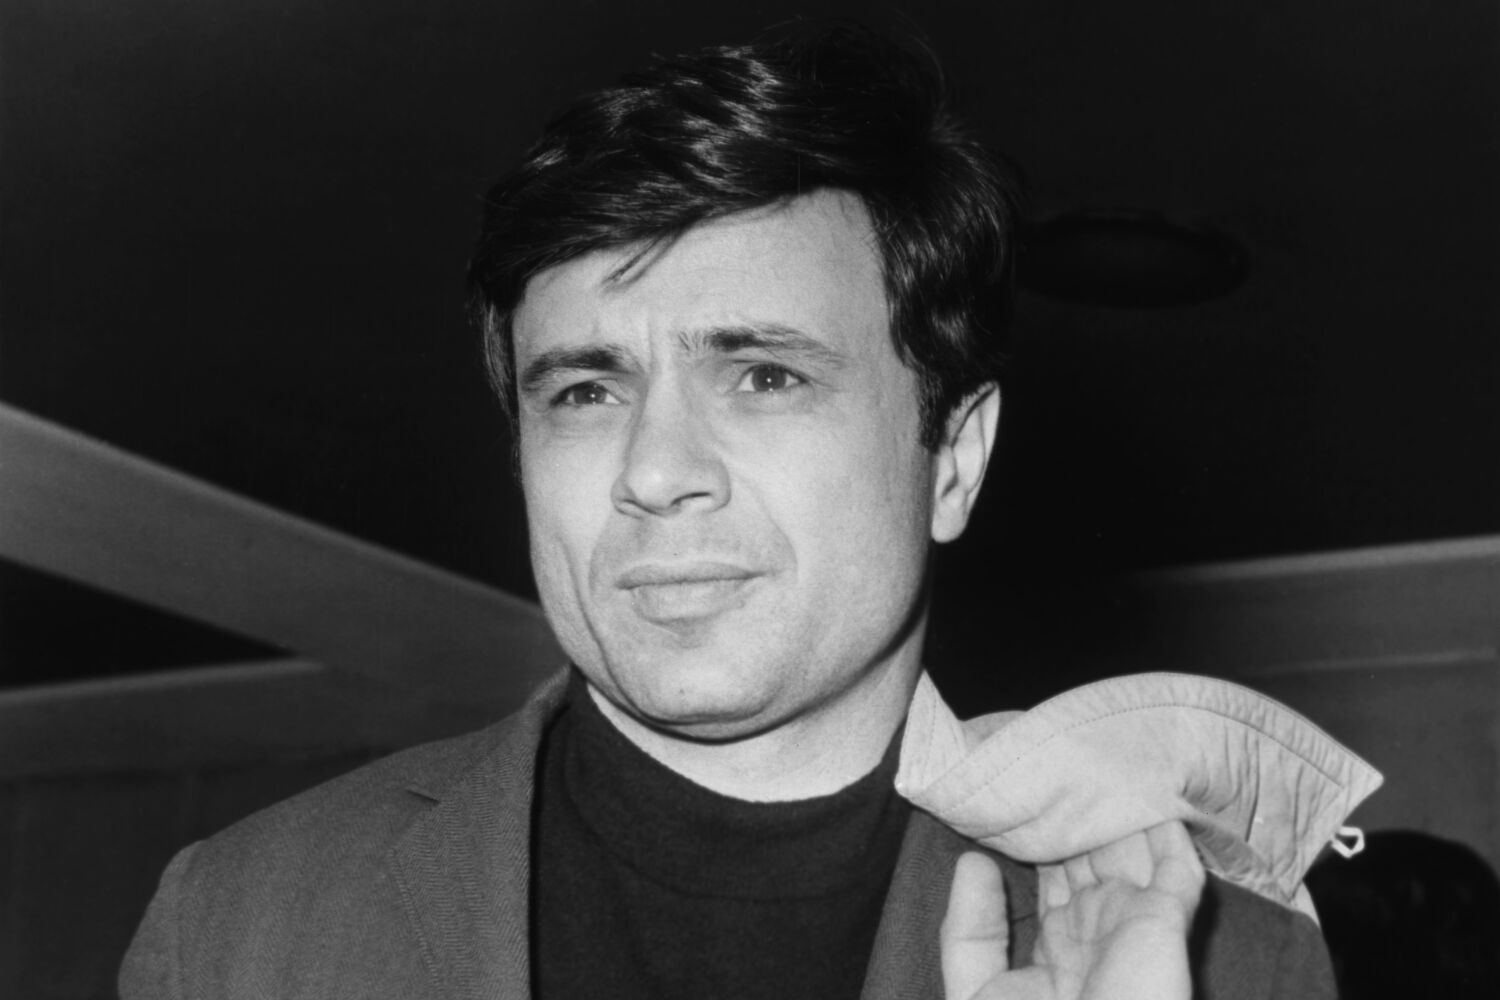 Robert Blake, star of 'In Cold Blood' who faced murder charges in real life, dies at 89